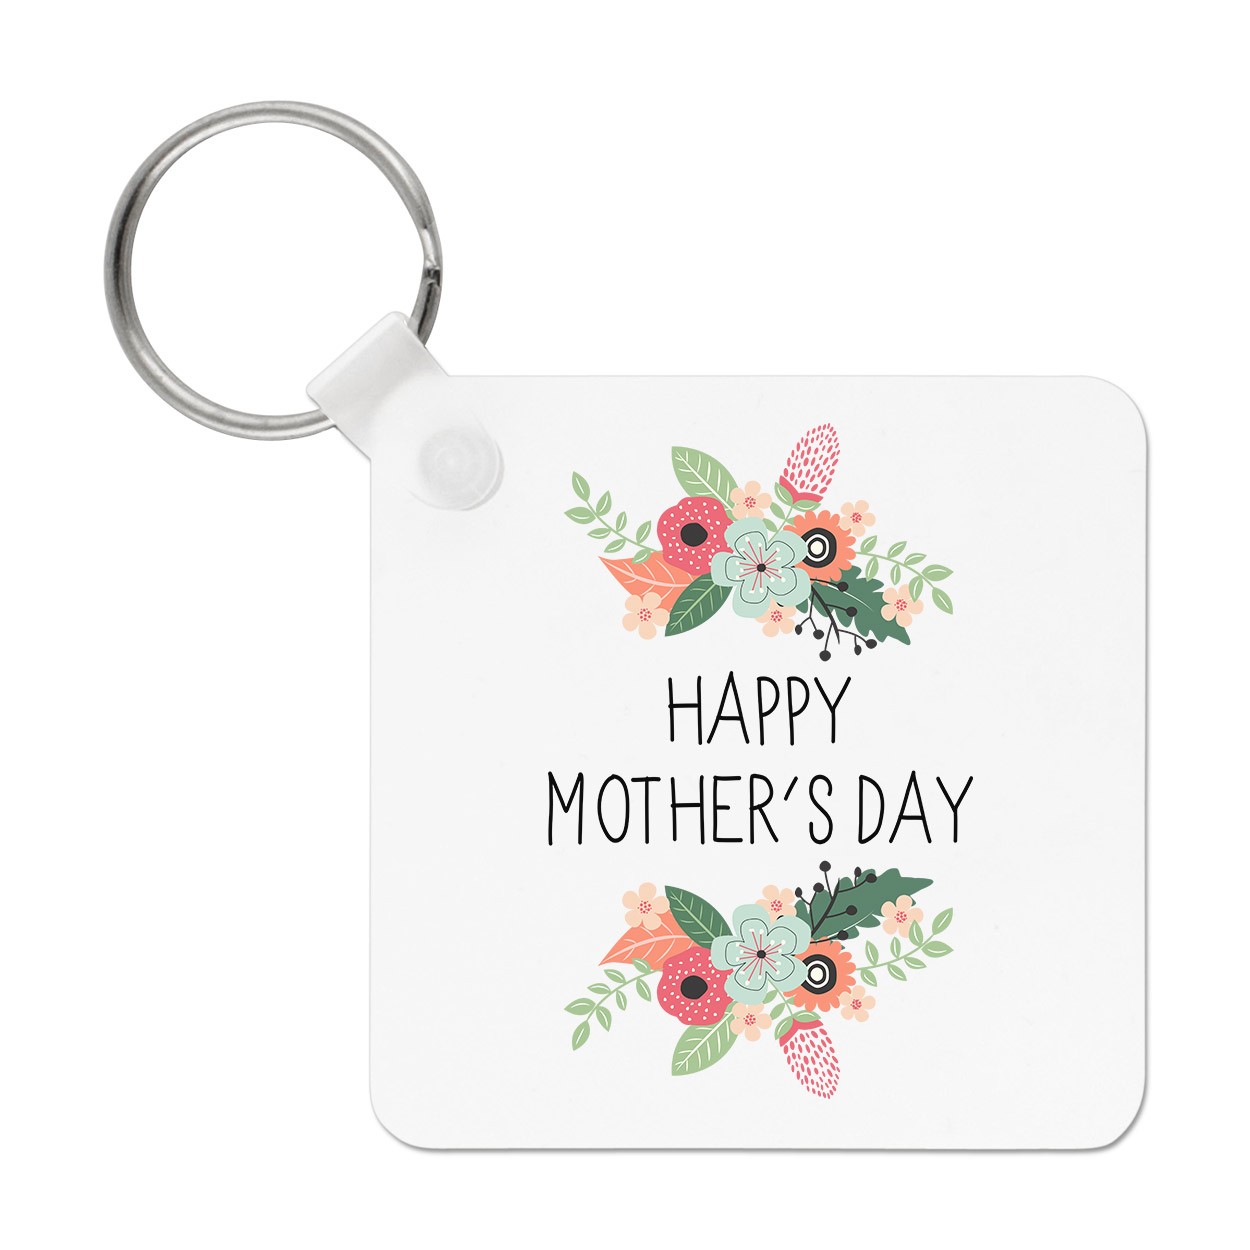 Happy Mother's Day Flowers Keyring Key Chain